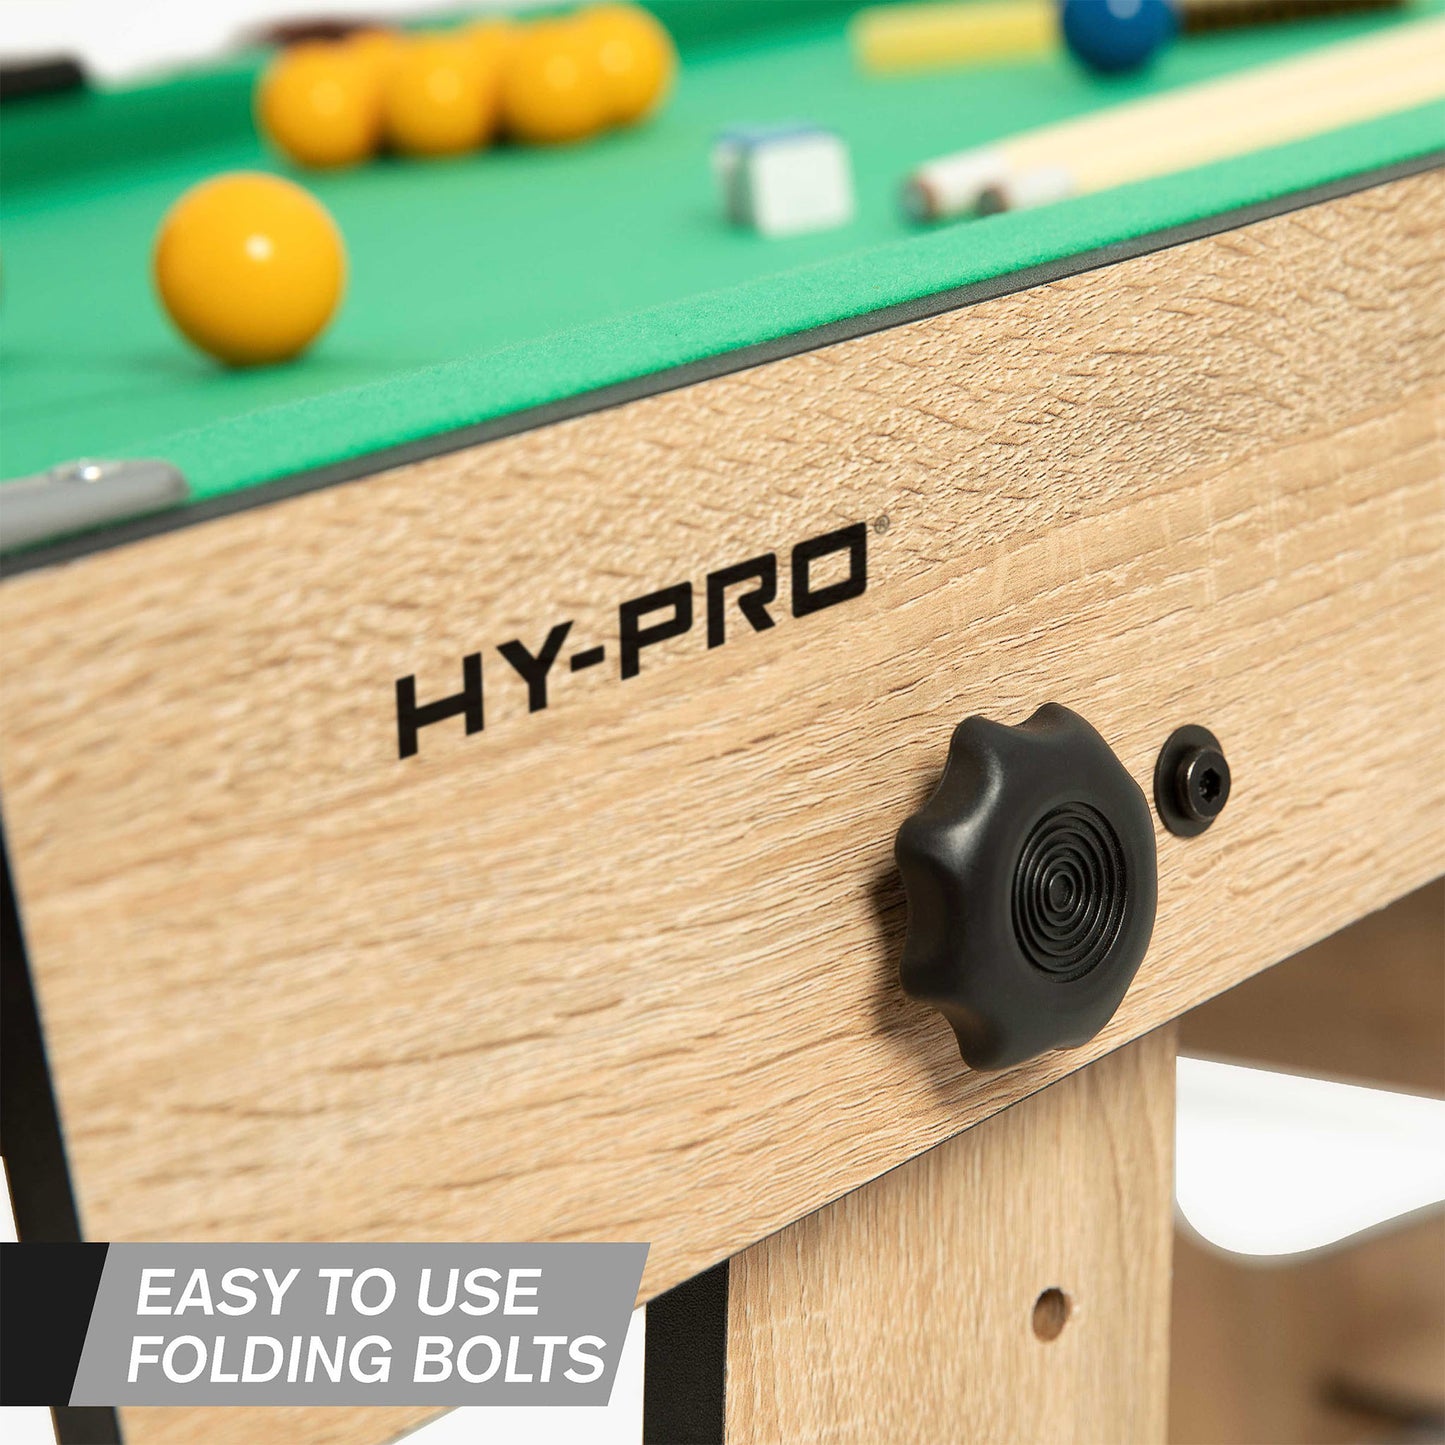 Hy-Pro 6ft Folding Snooker and Pool Table